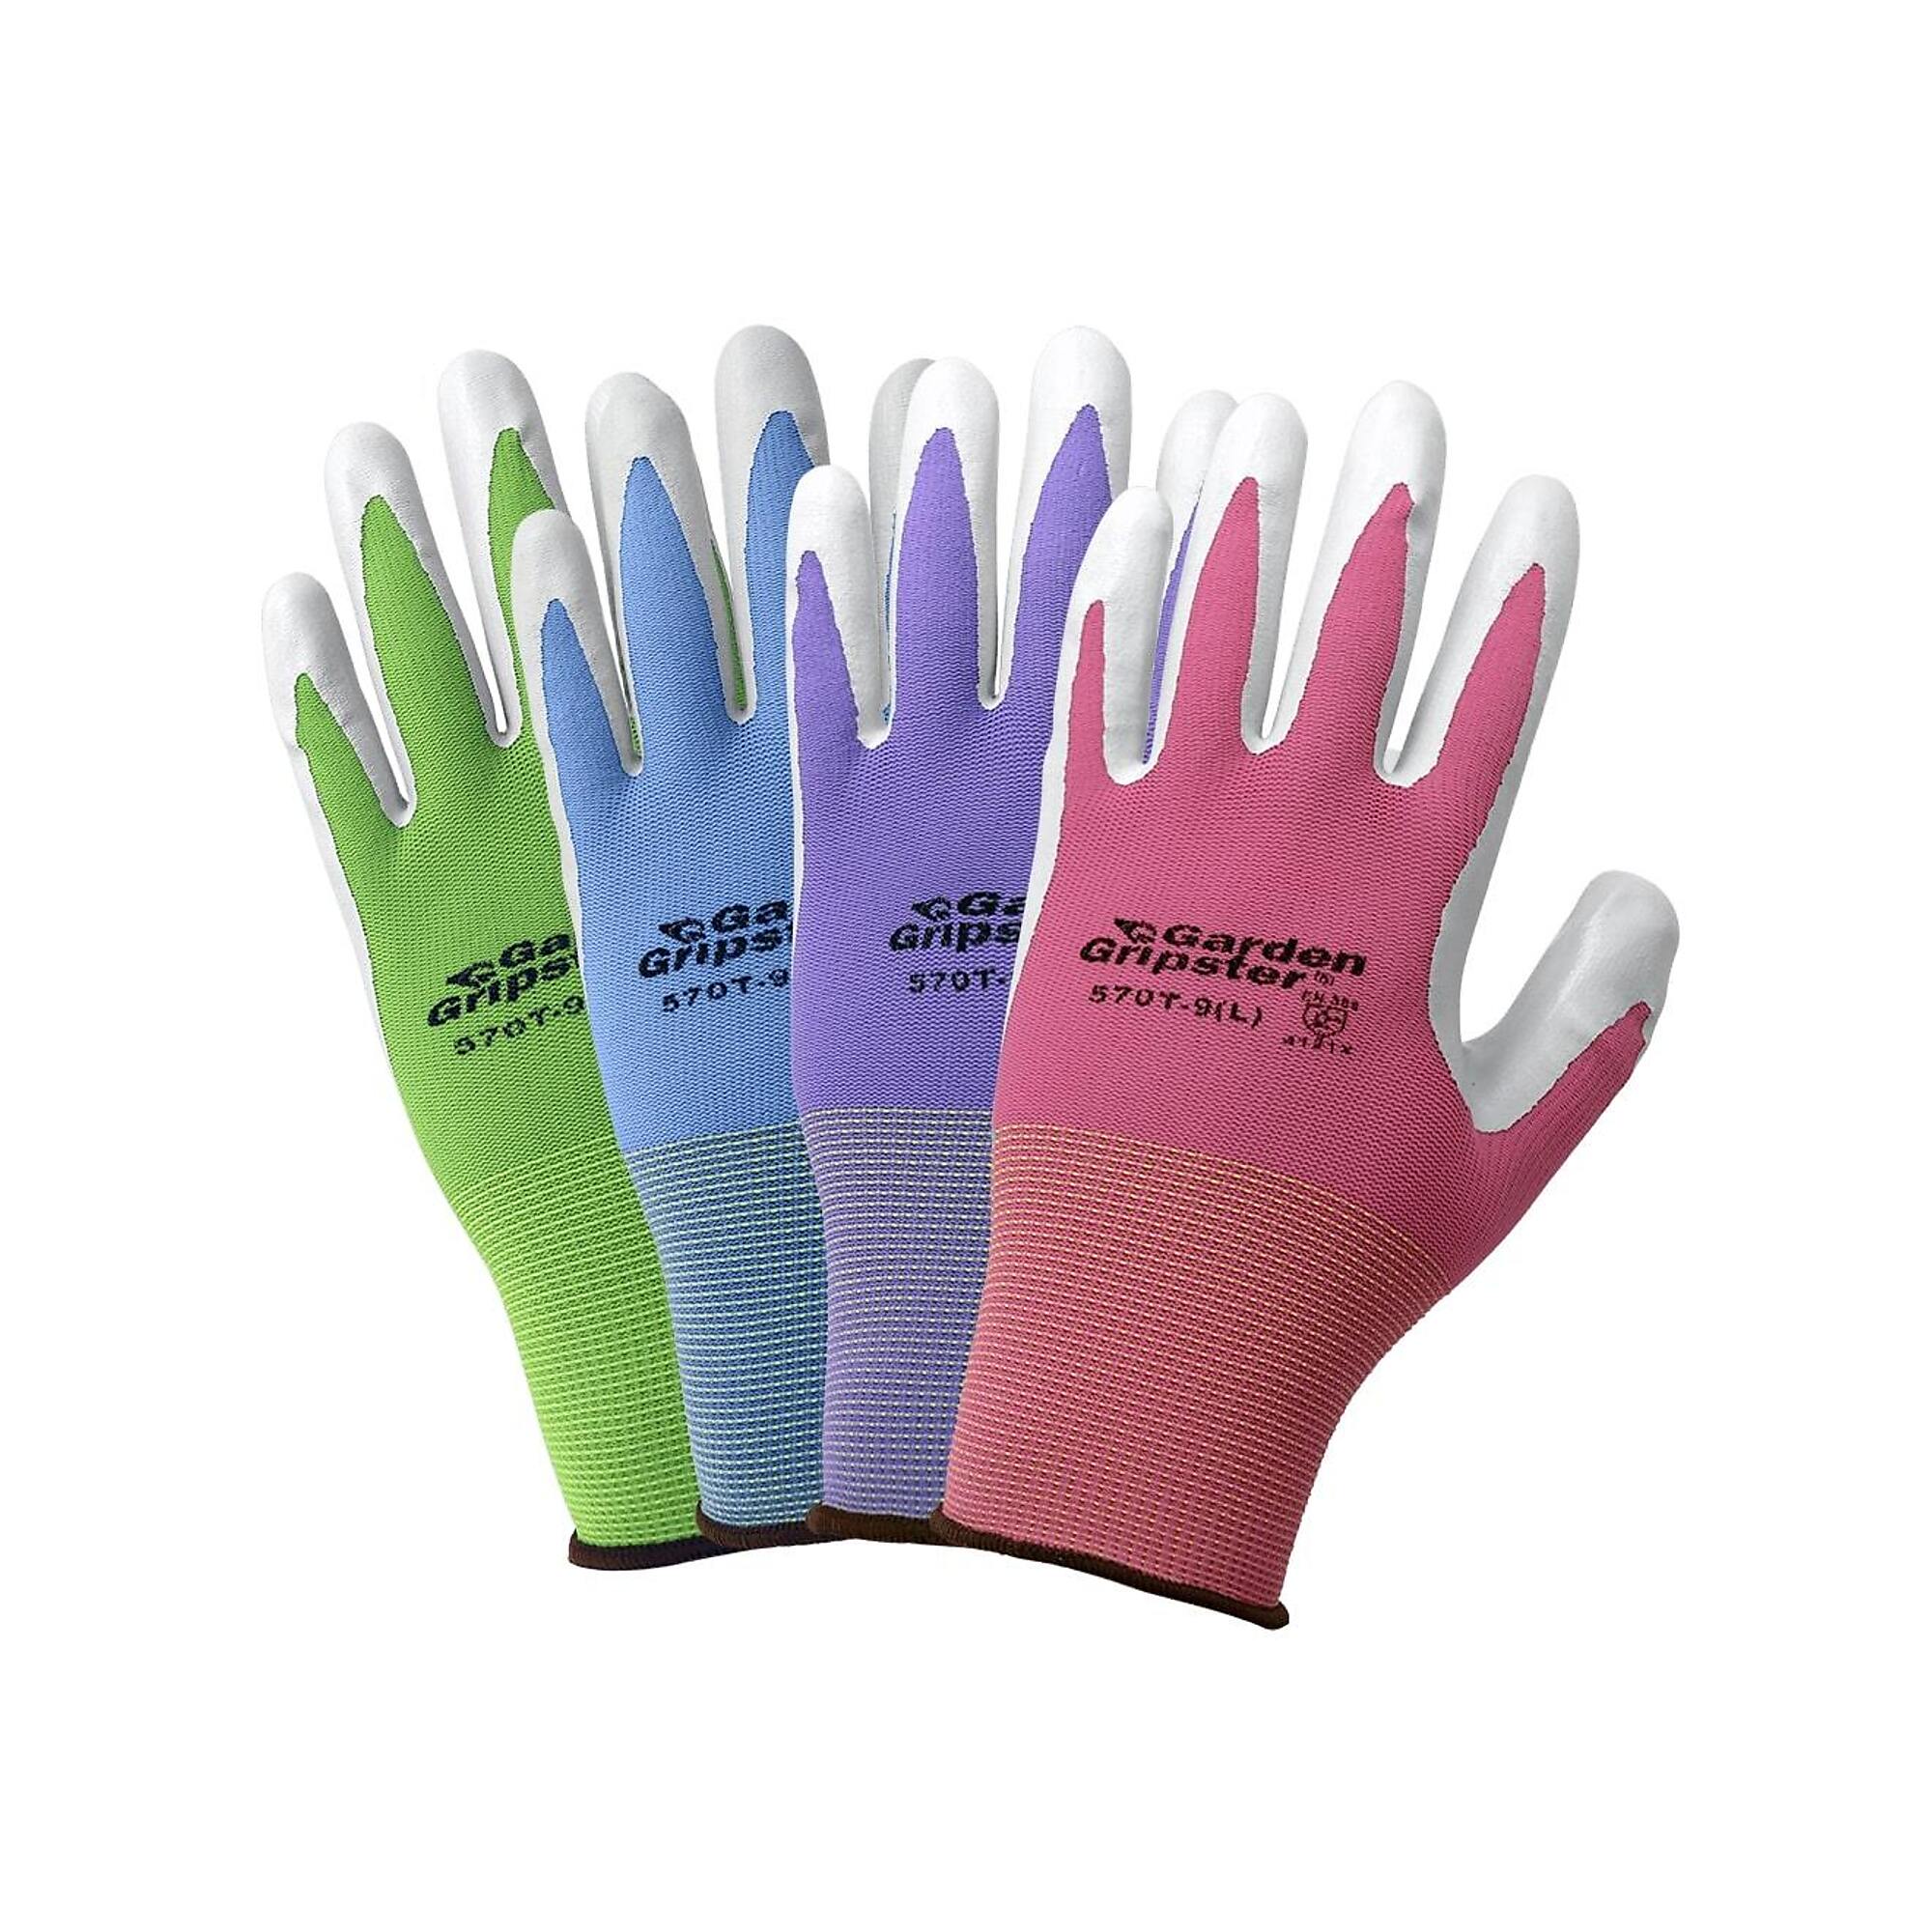 Global Glove Garden Gripster , Multi-Color, Nitrile Coated, Cut A1 Garden Gloves- 12 Pairs, Size L, Color Blue, Pink, Green, and Purple, Included (qty